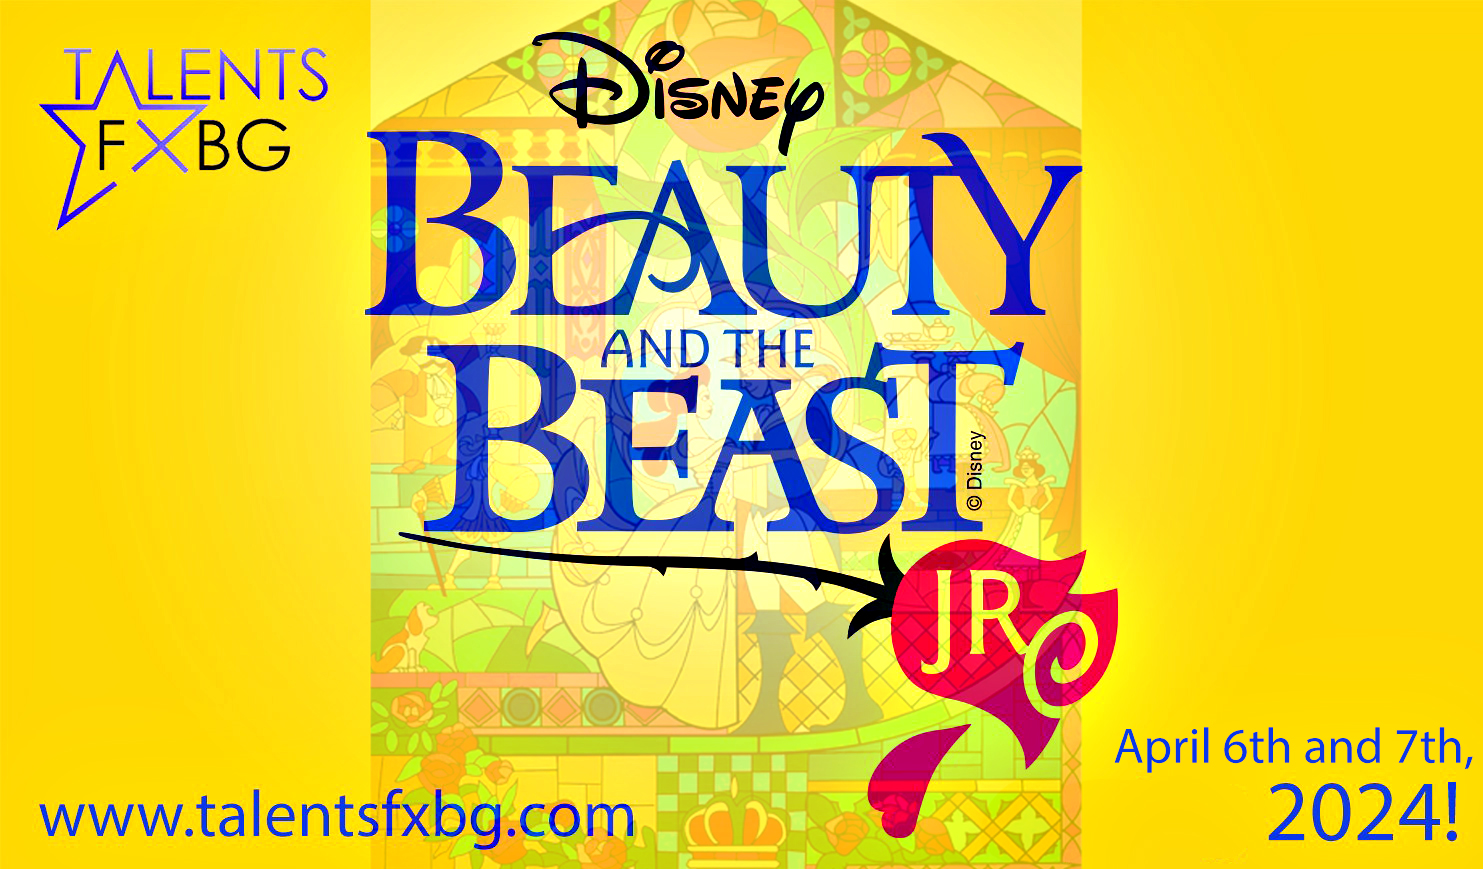 <h1 class="tribe-events-single-event-title">Talents FXBG presents Beauty and the Beast, Jr.</h1>